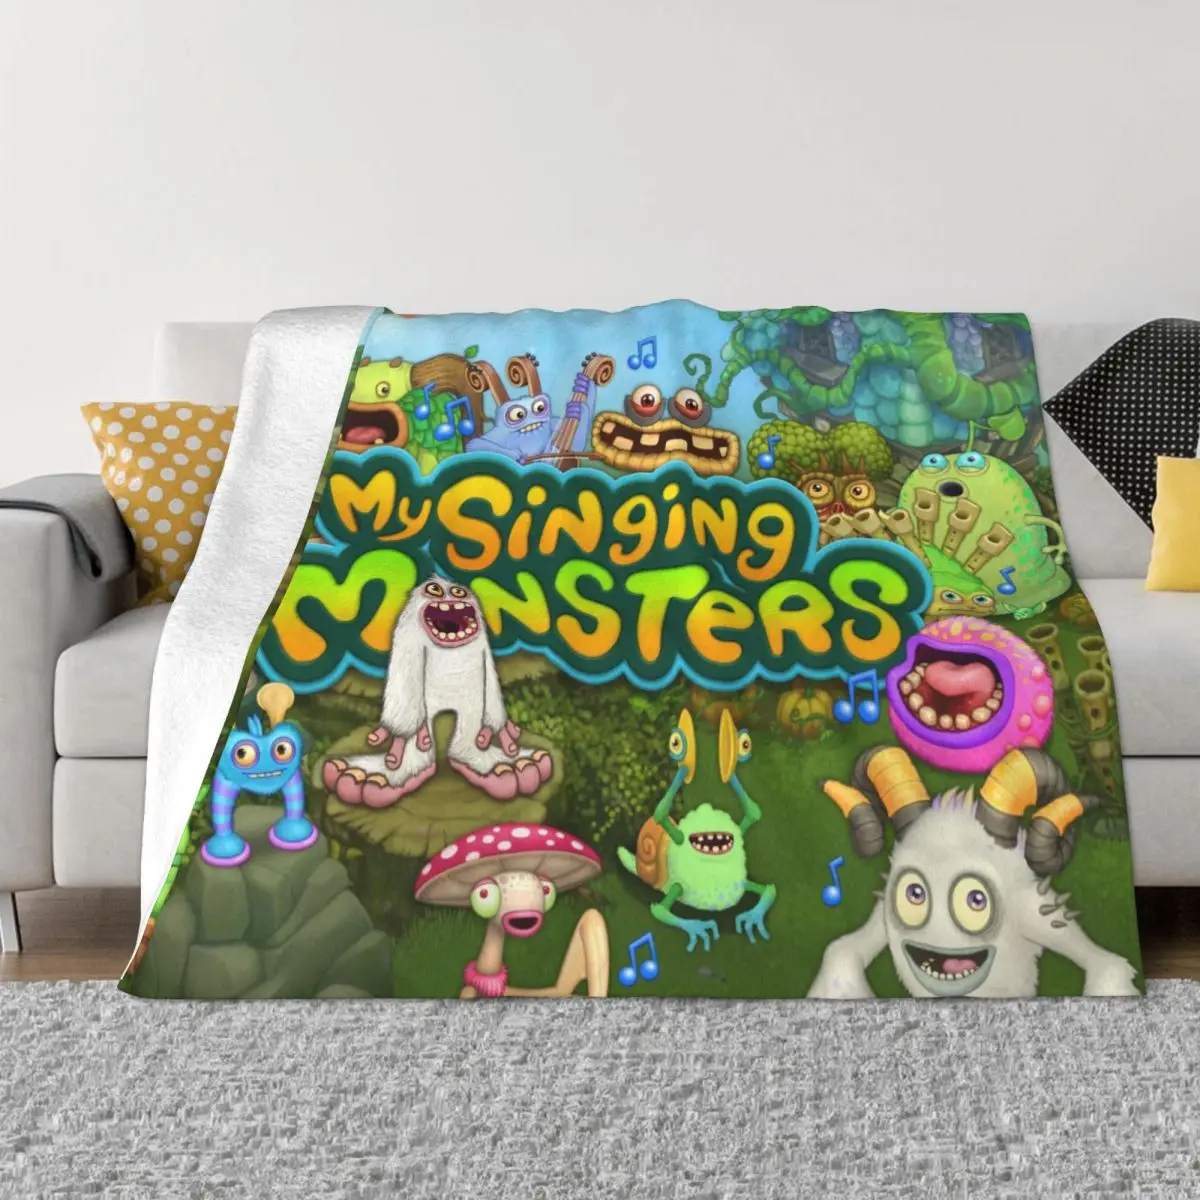 

My Singing Monsters Video Games Plaid Blanket Coral Fleece Plush Summer Super Soft Throw Blanket for Bedding Car Bedding Throws